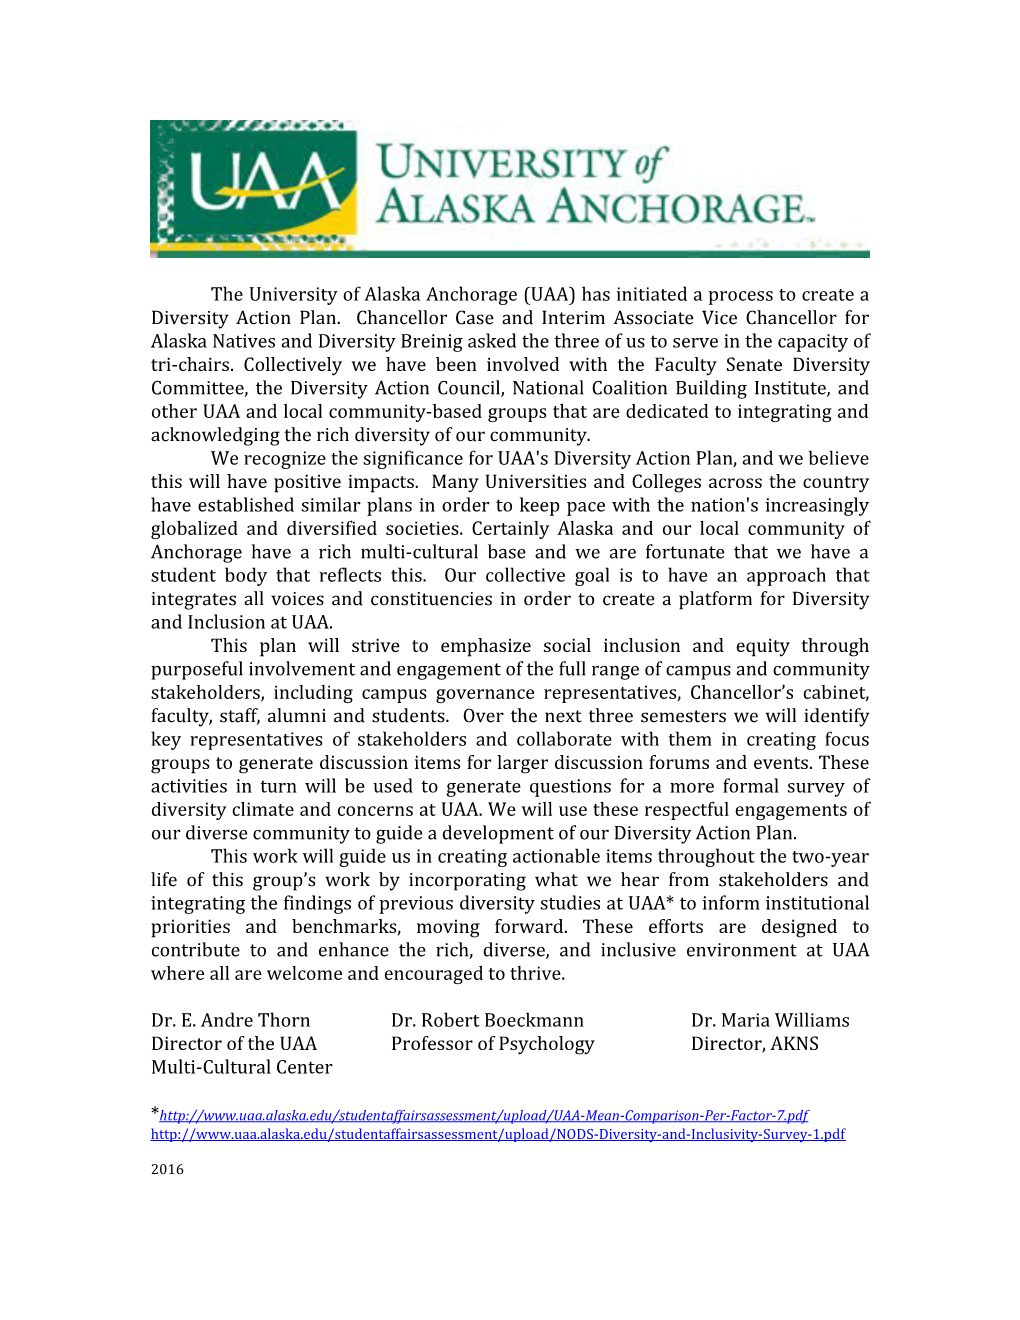 The University of Alaska Anchorage (UAA) Has Initiated a Process to Create a Diversity